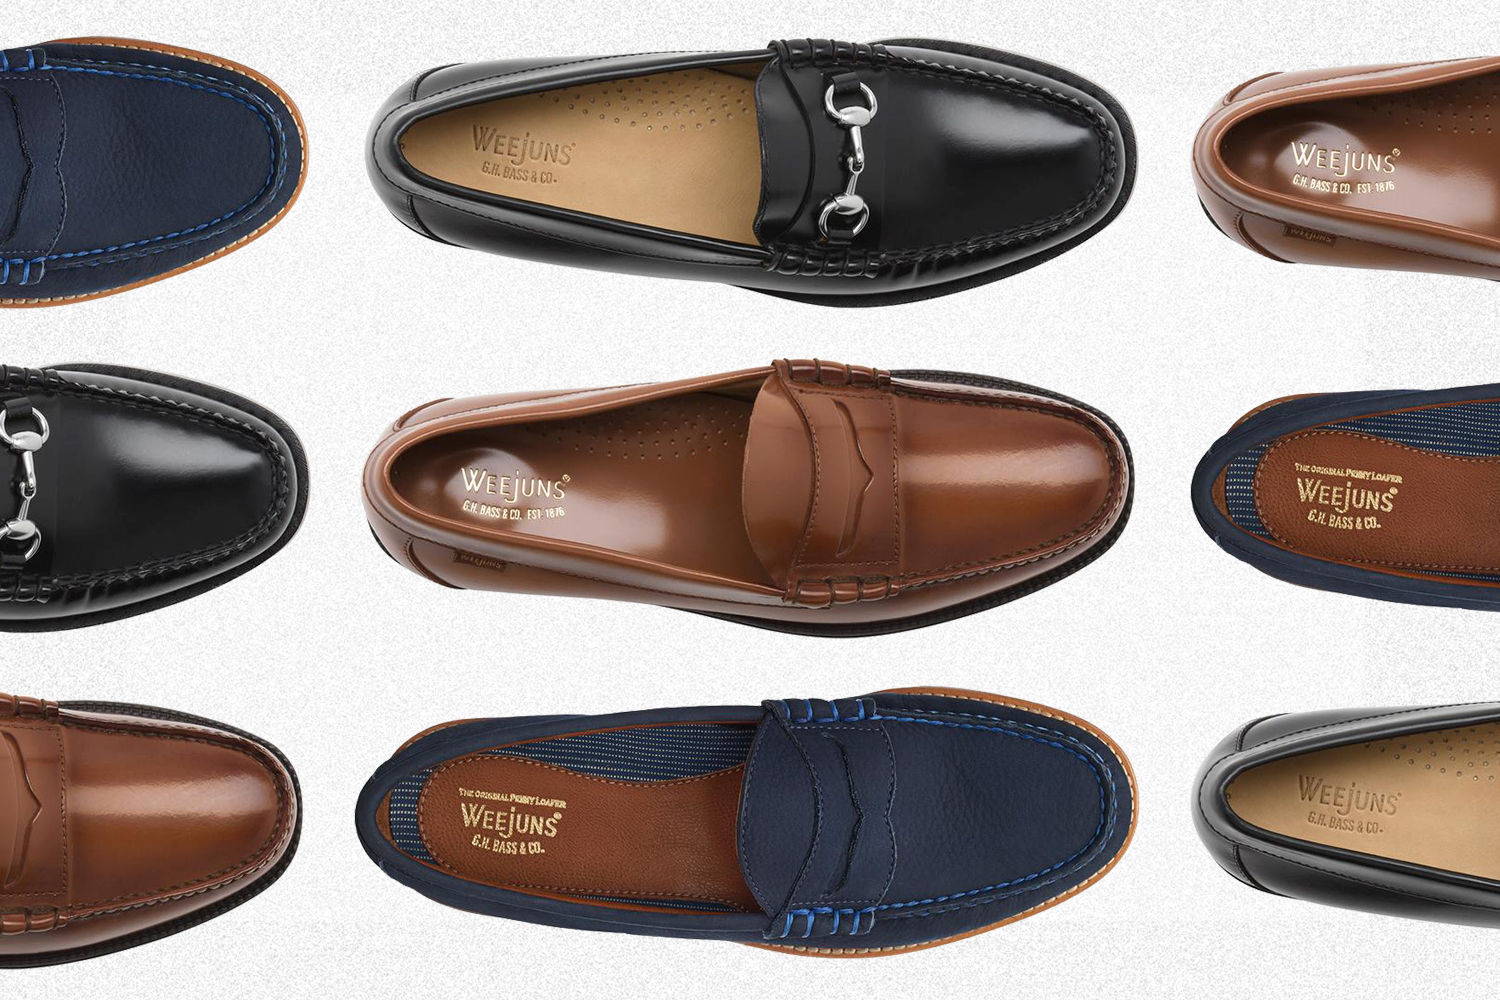 Take Up to 60% Off Weejuns Loafers at G.H. Bass & Co. InsideHook